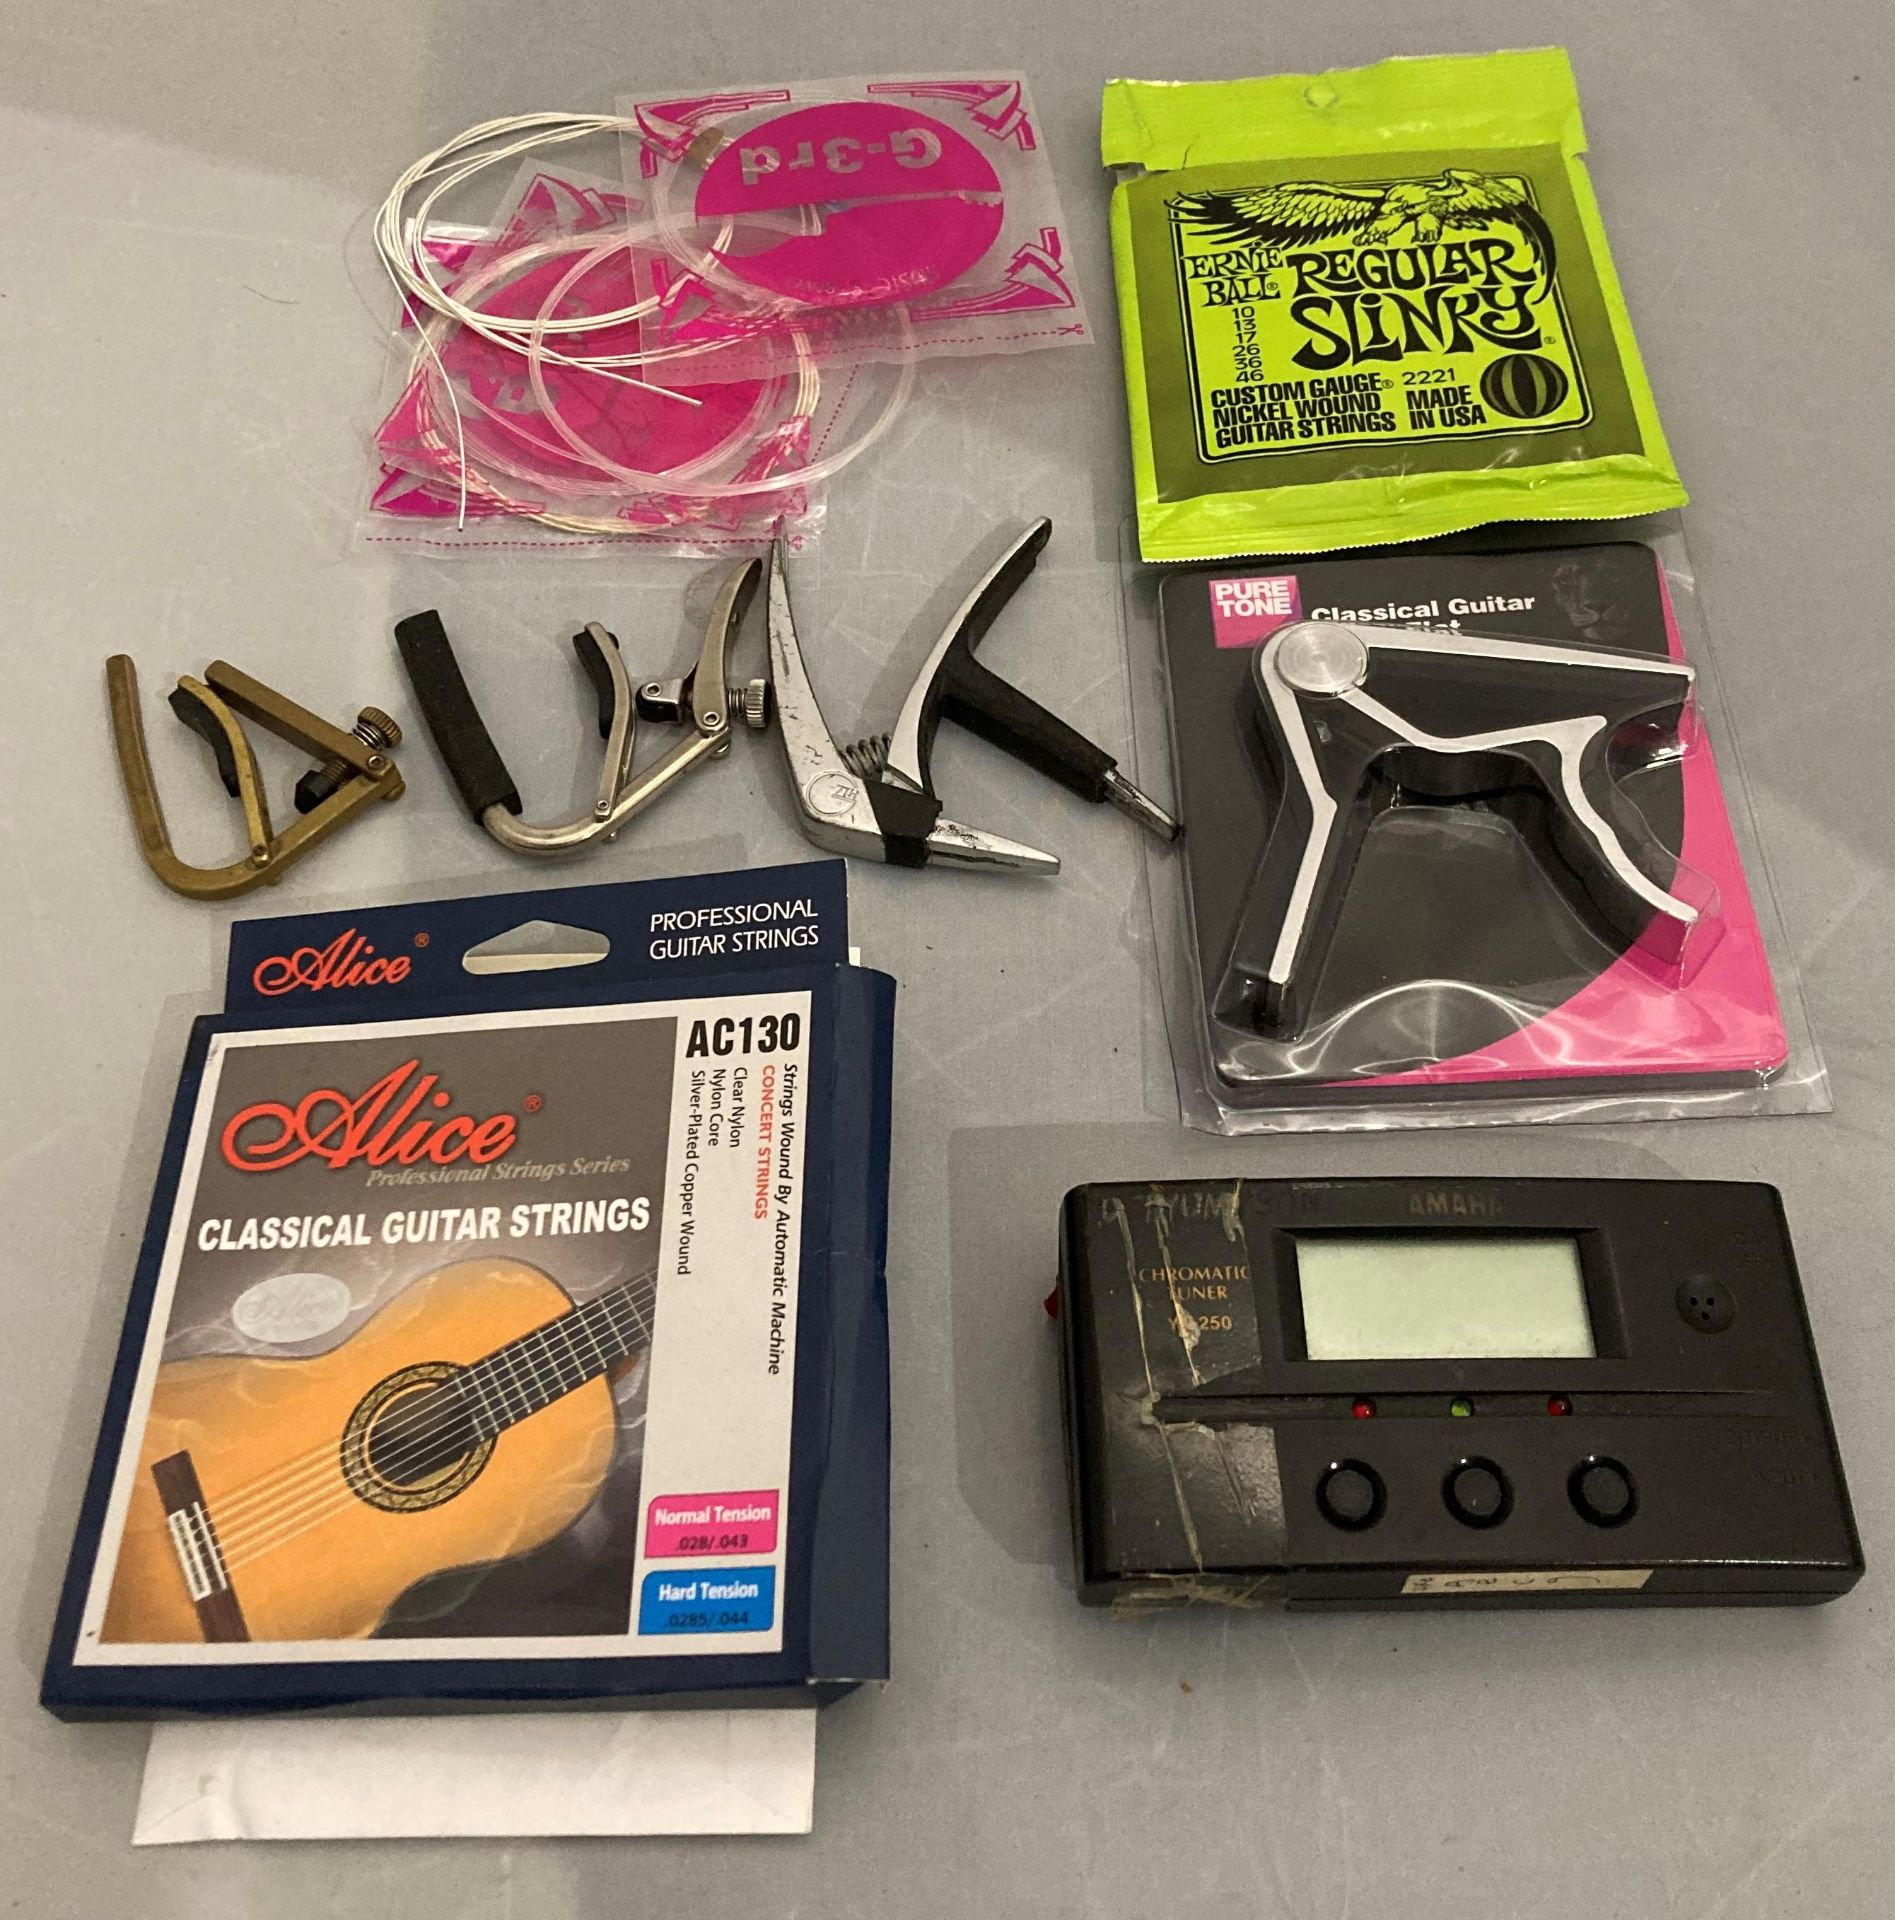 Contents to bag - sixteen assorted guitar strings by Ernie Ball and Alice AC130 etc and four